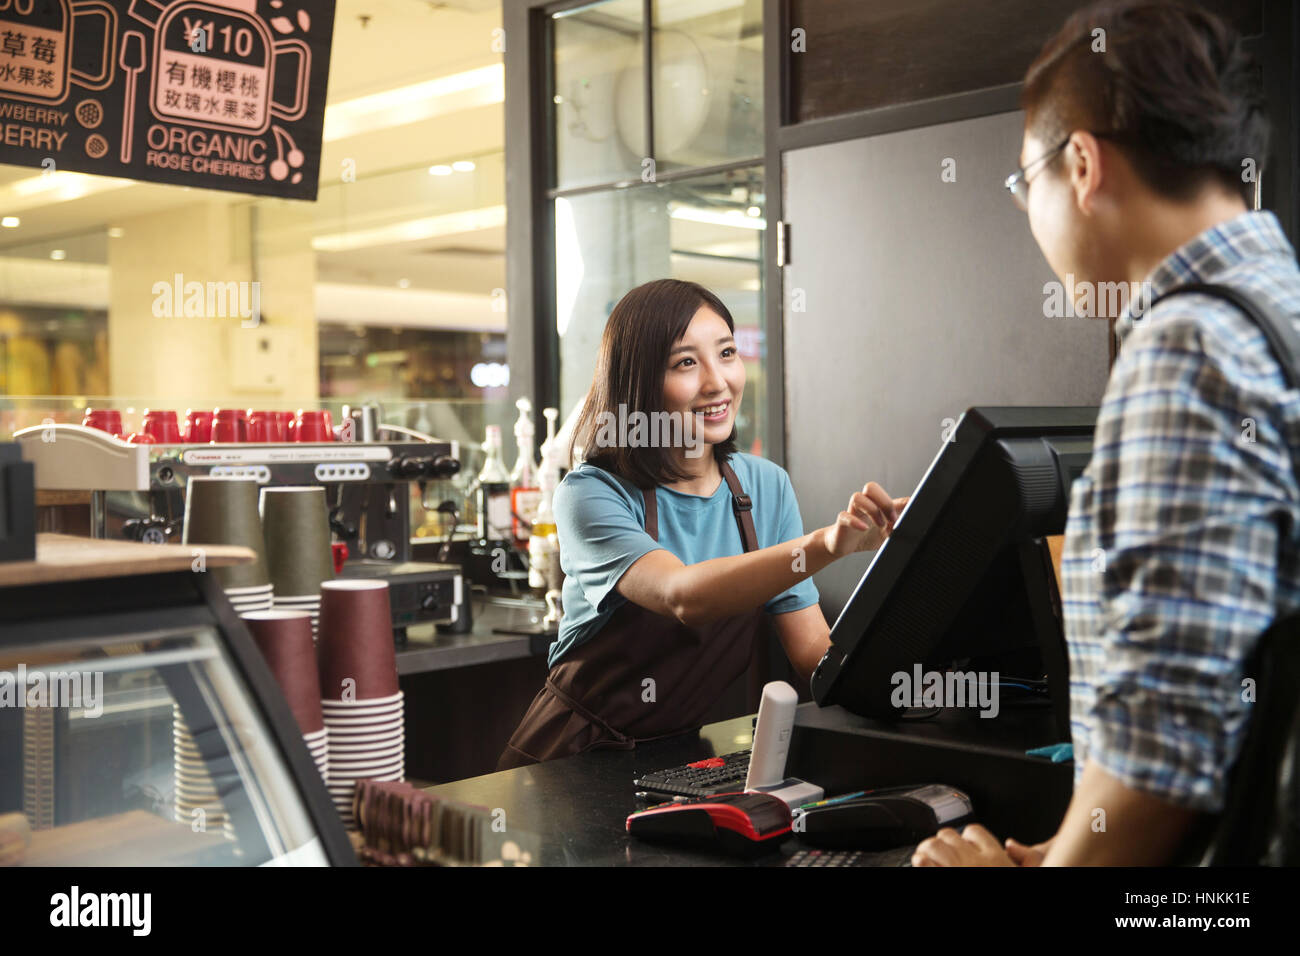 Cafe cashier and customer Stock Photo